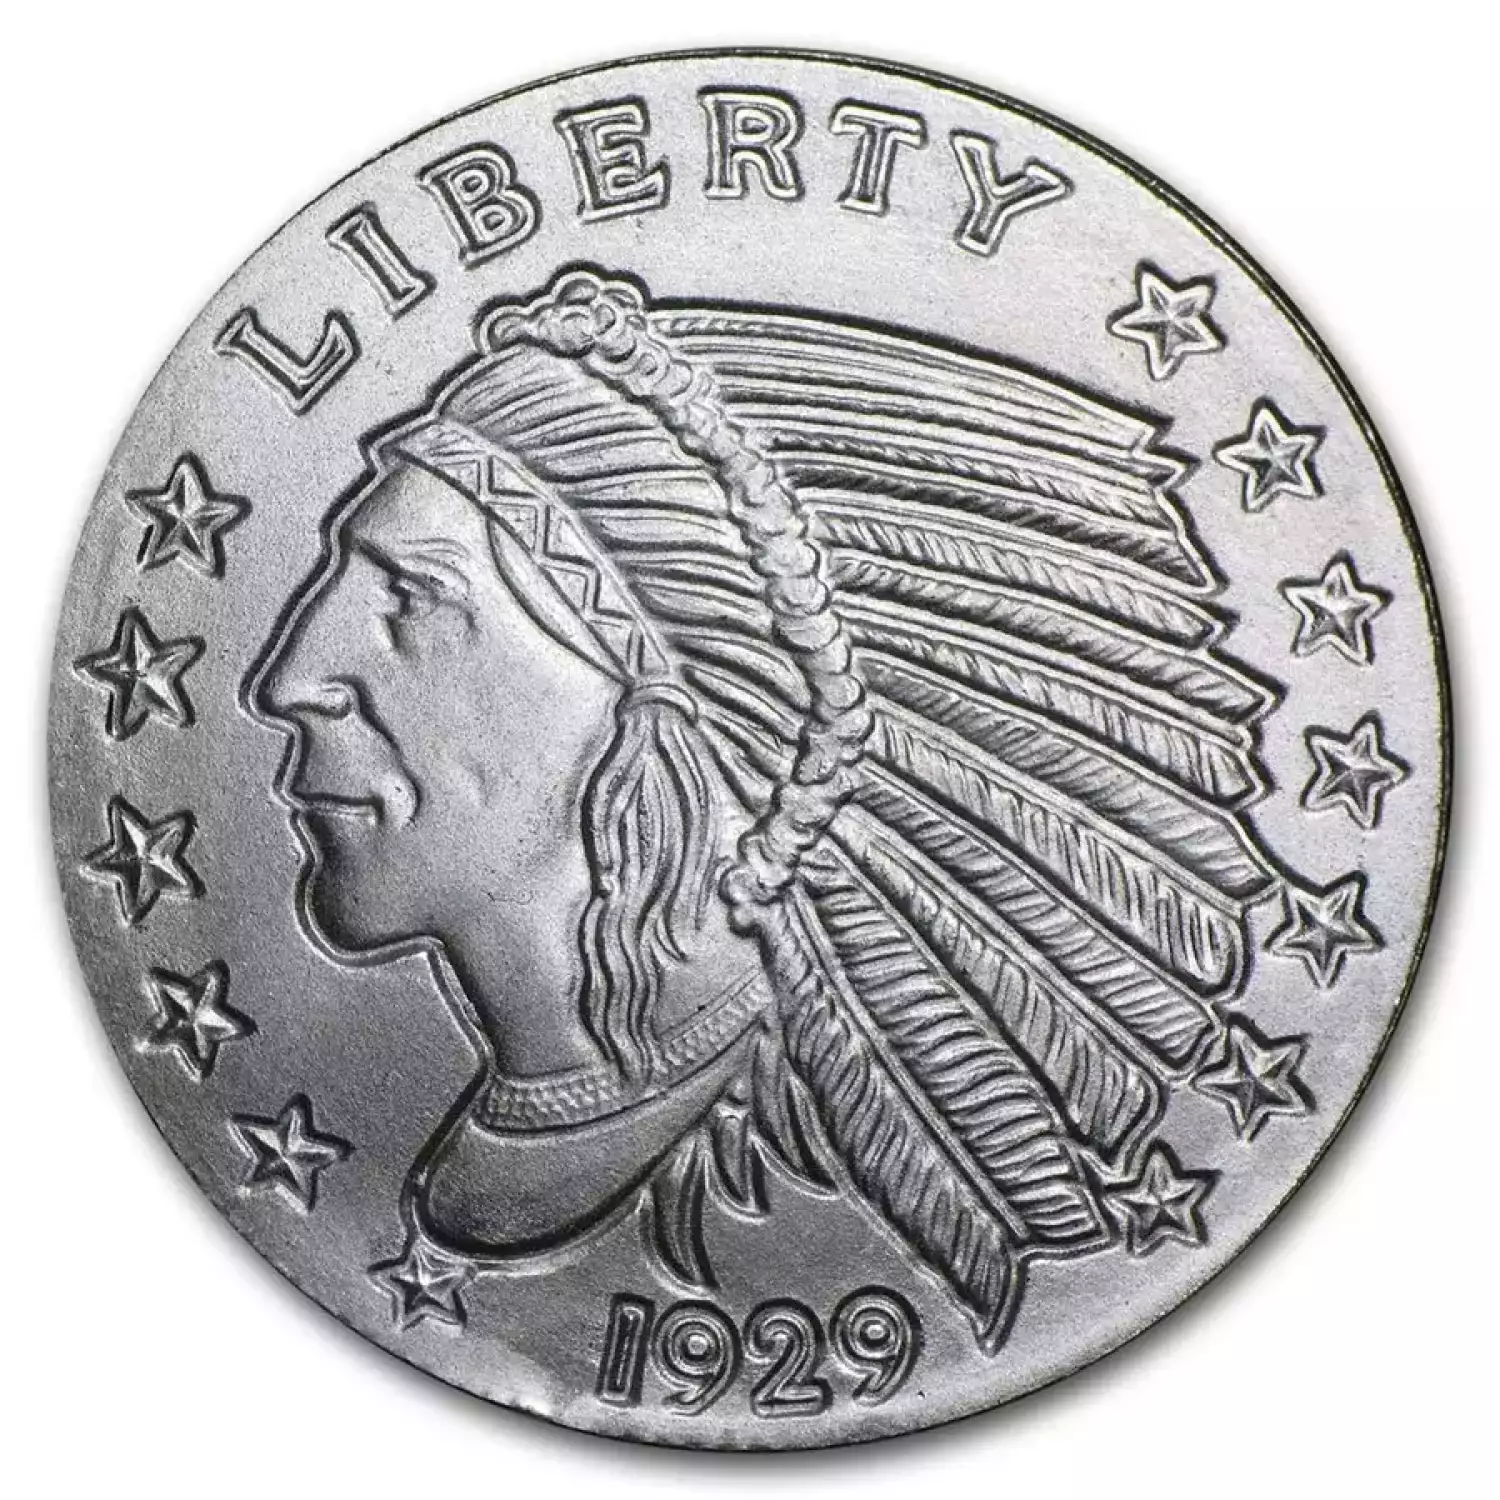 1/4 oz GSM Incuse Indian Silver Round